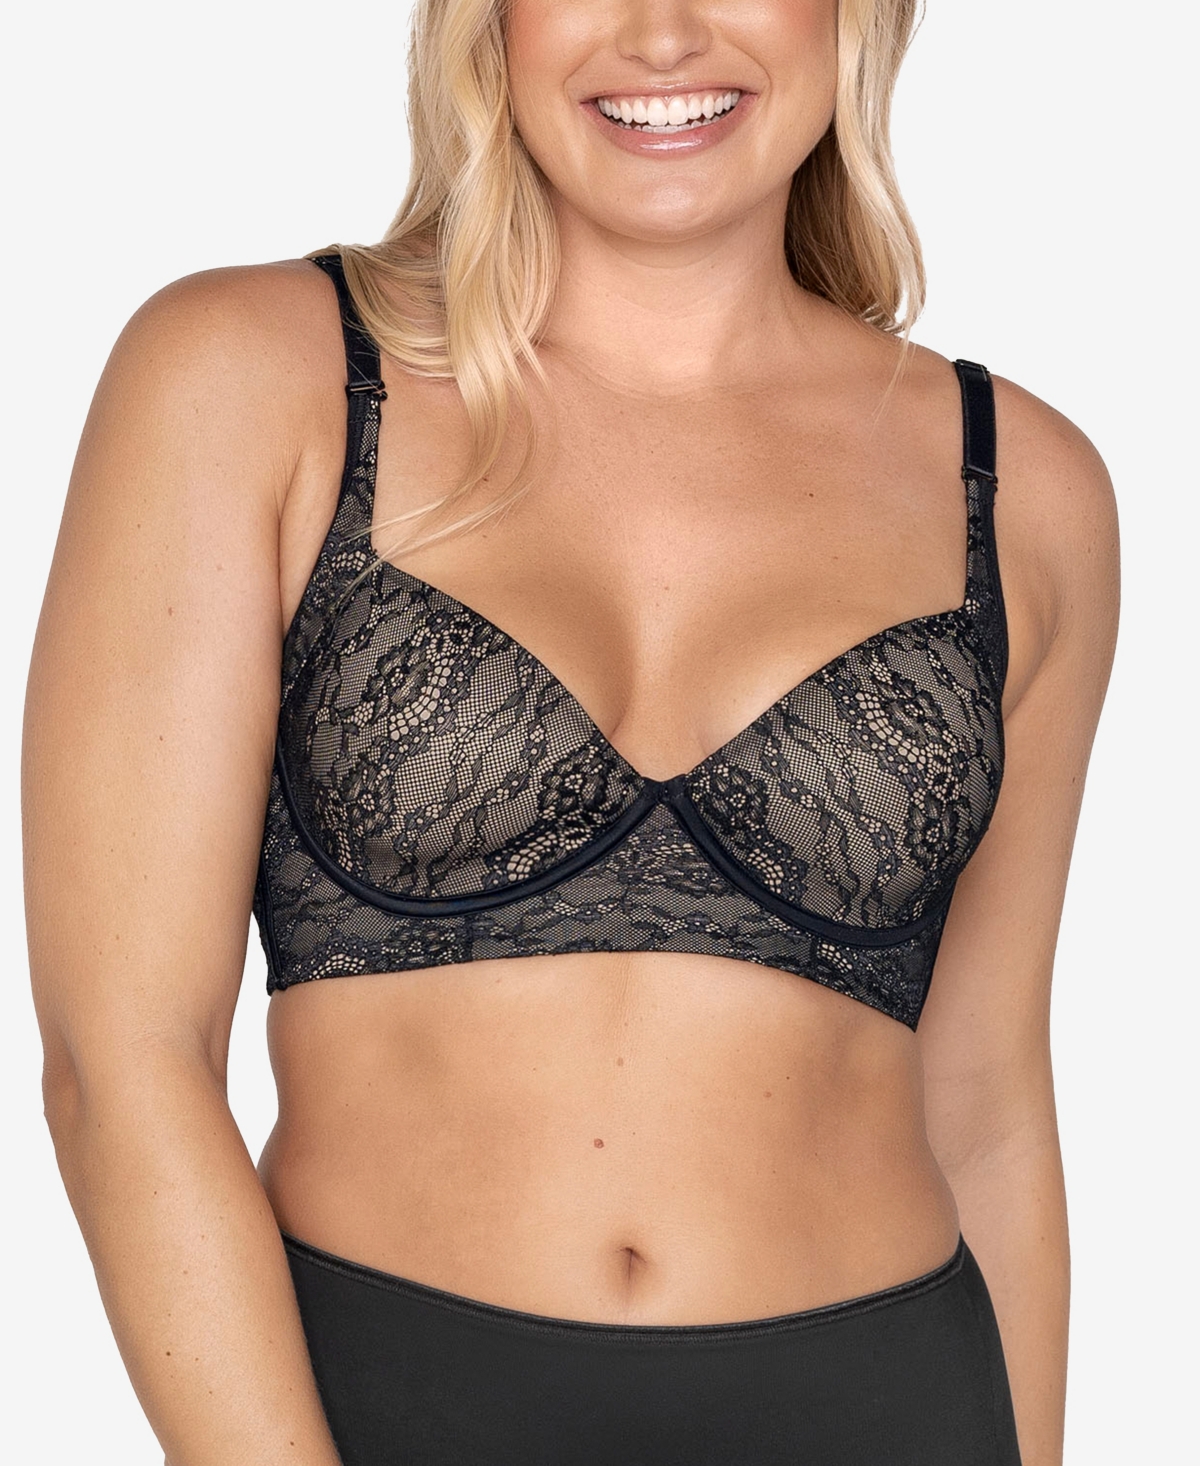 Women's Lace Back Smoothing Underwire Bra - Black